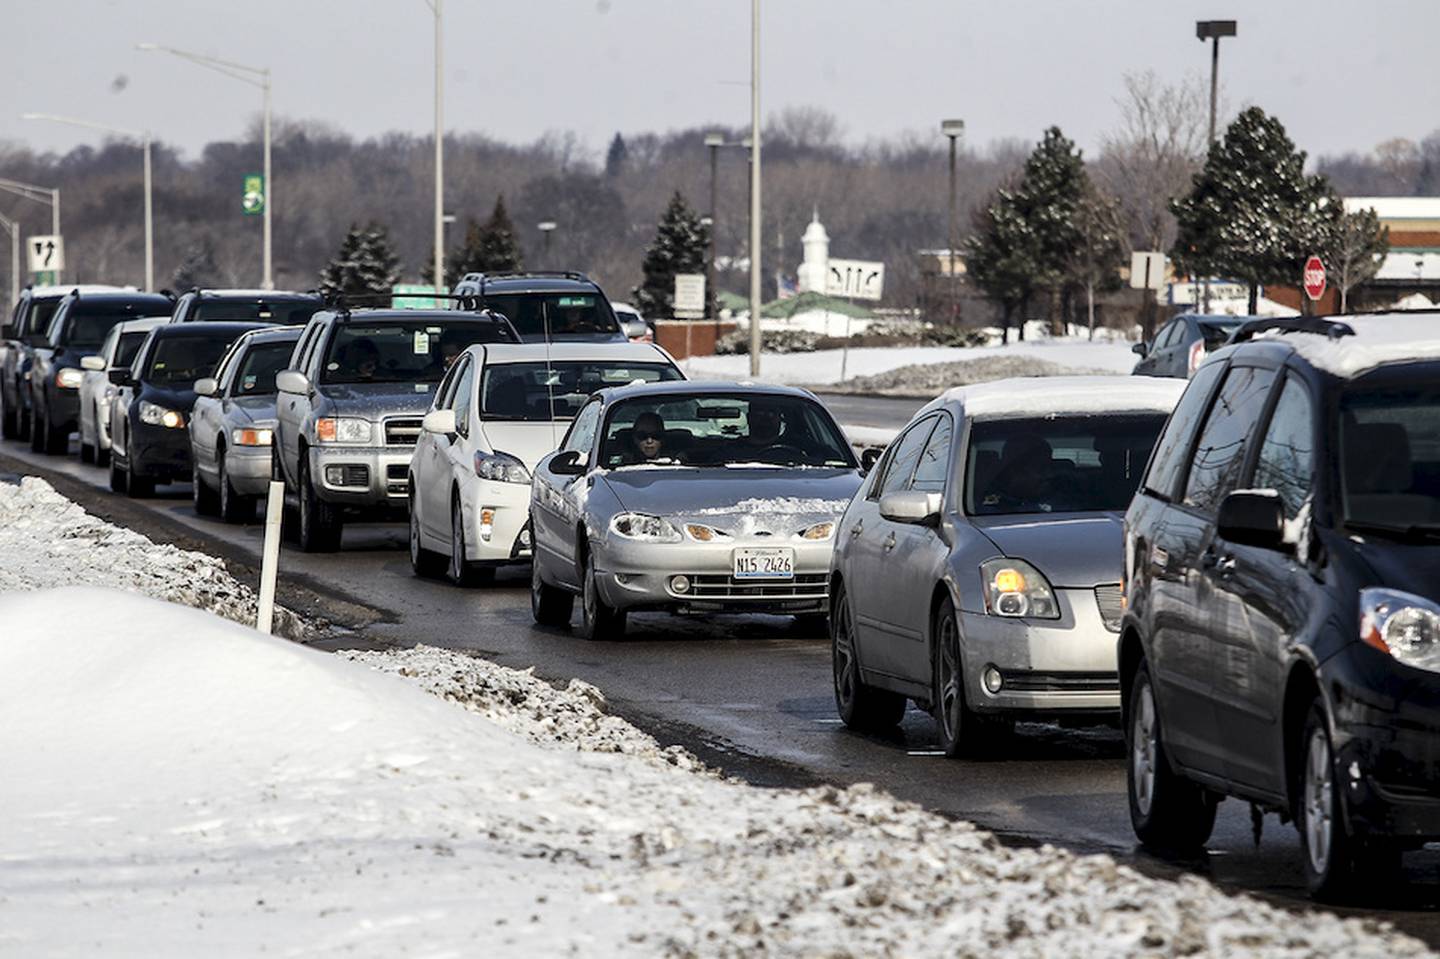 Traffic is backed up Sunday near the intersection of Randall and Algonquin roads in Lake in the Hills. The McHenry County Board voted Tuesday on several measures to spend up to $16 million to prepare for the Randall Road widening and improvement project.